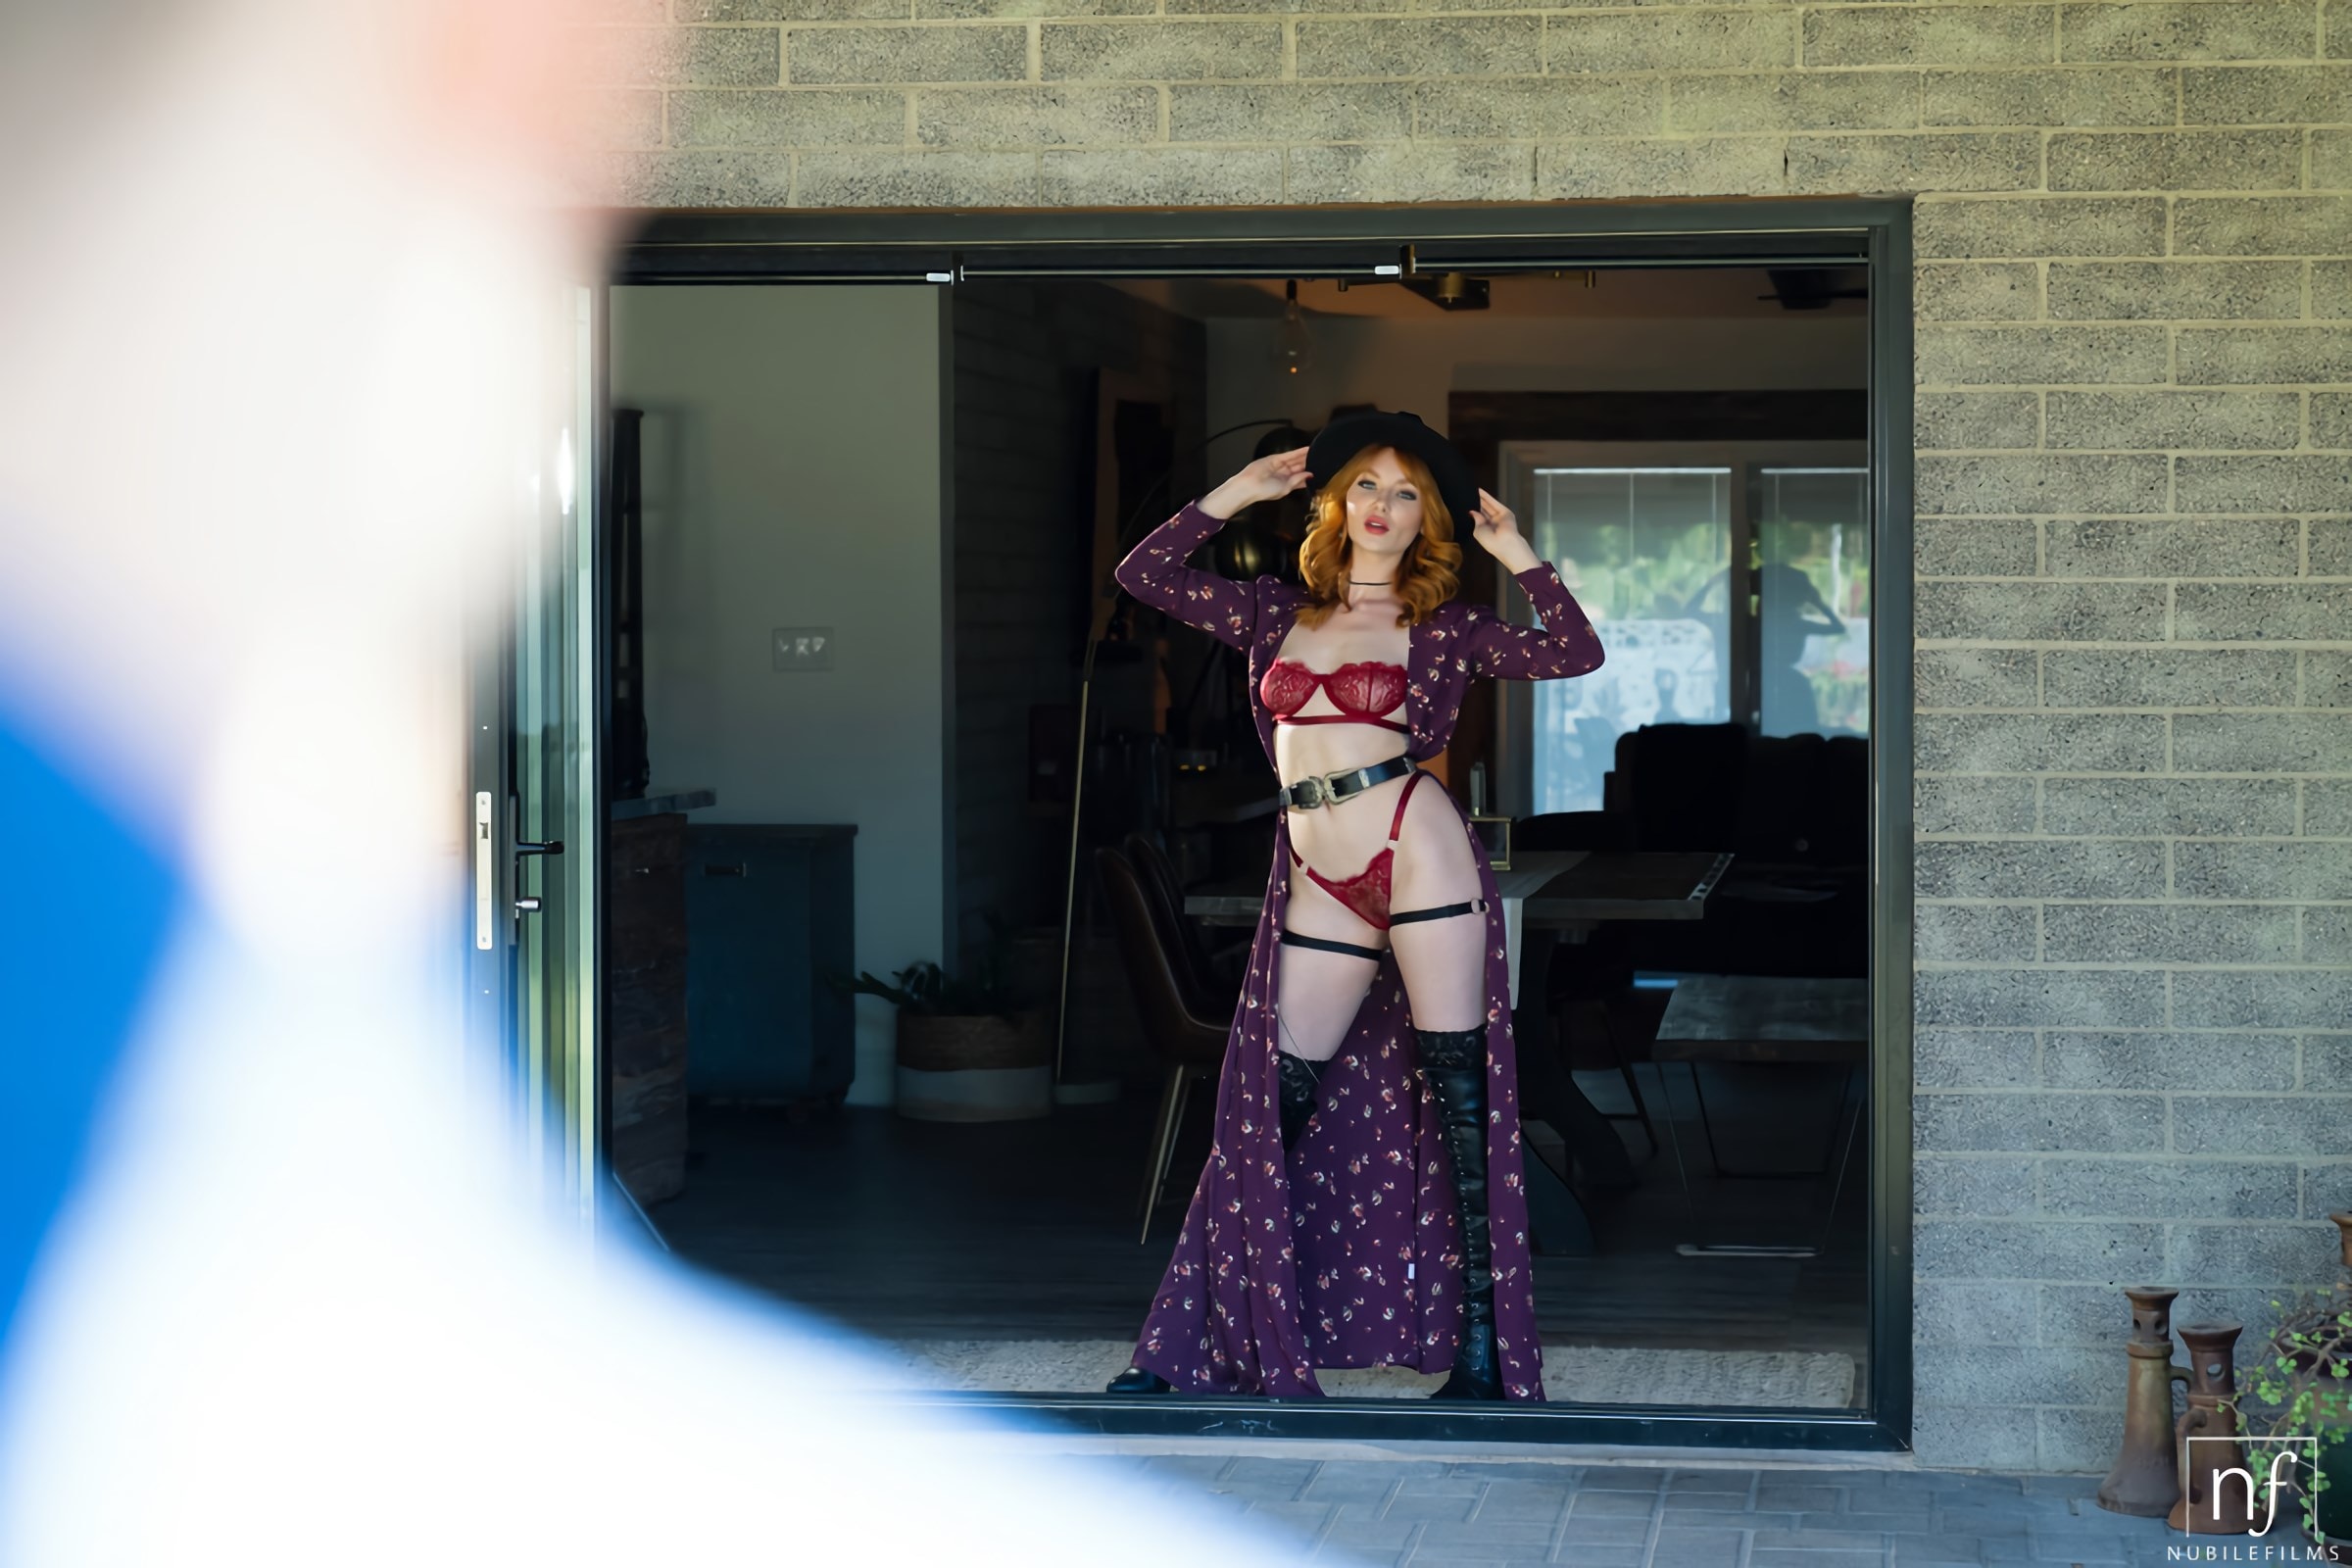 Nubiles 'August 2021 Fantasy Of The Month - S2:E2' starring Lacy Lennon (Photo 1)